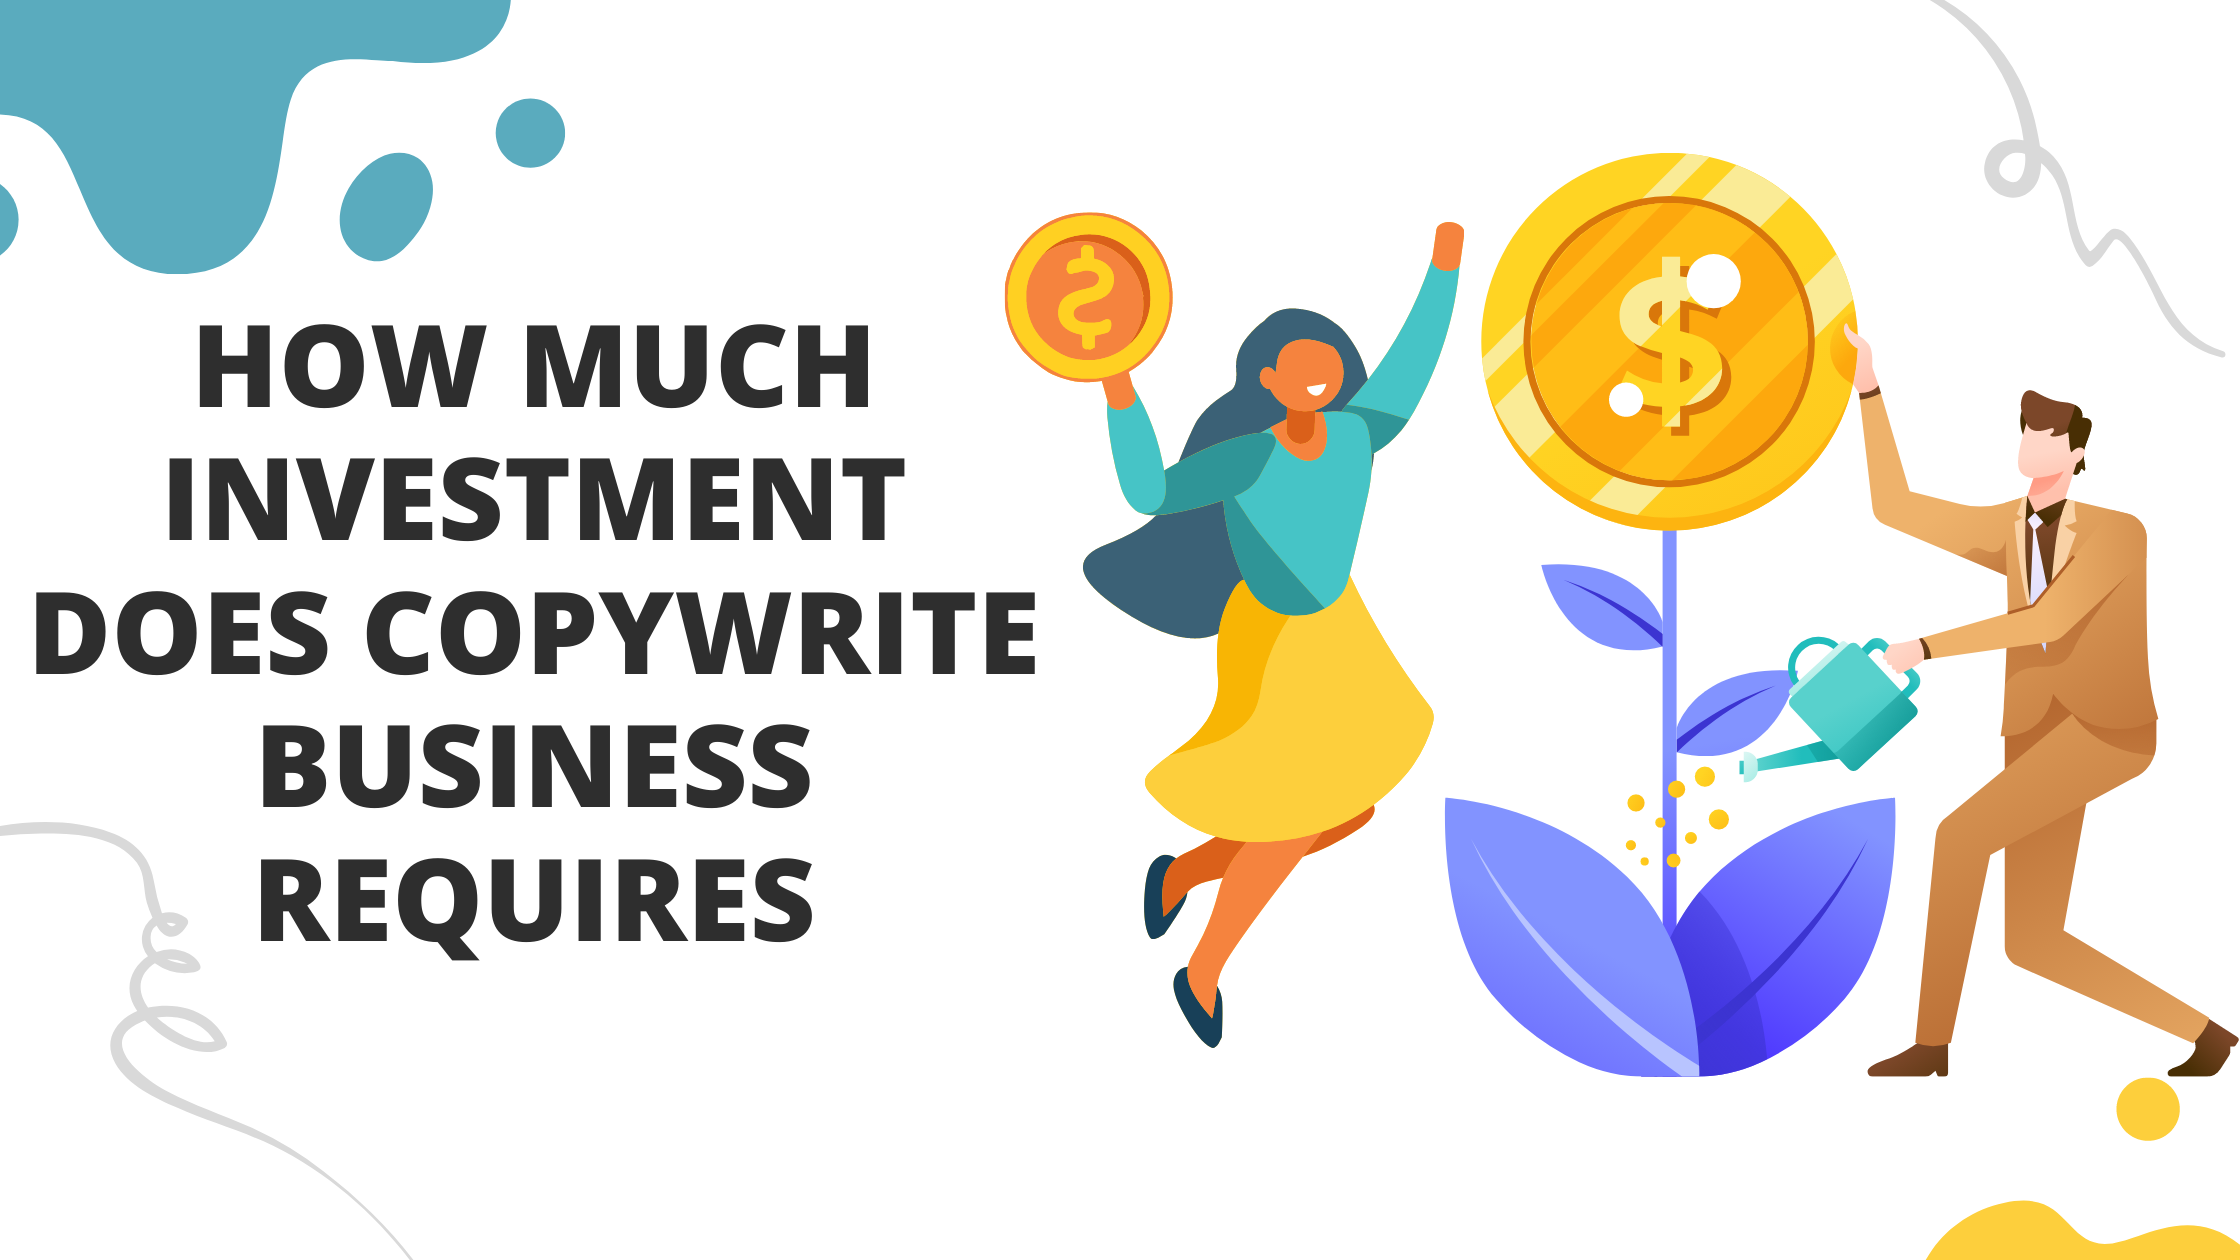 How Much Investment Does Copywrite Business Requires